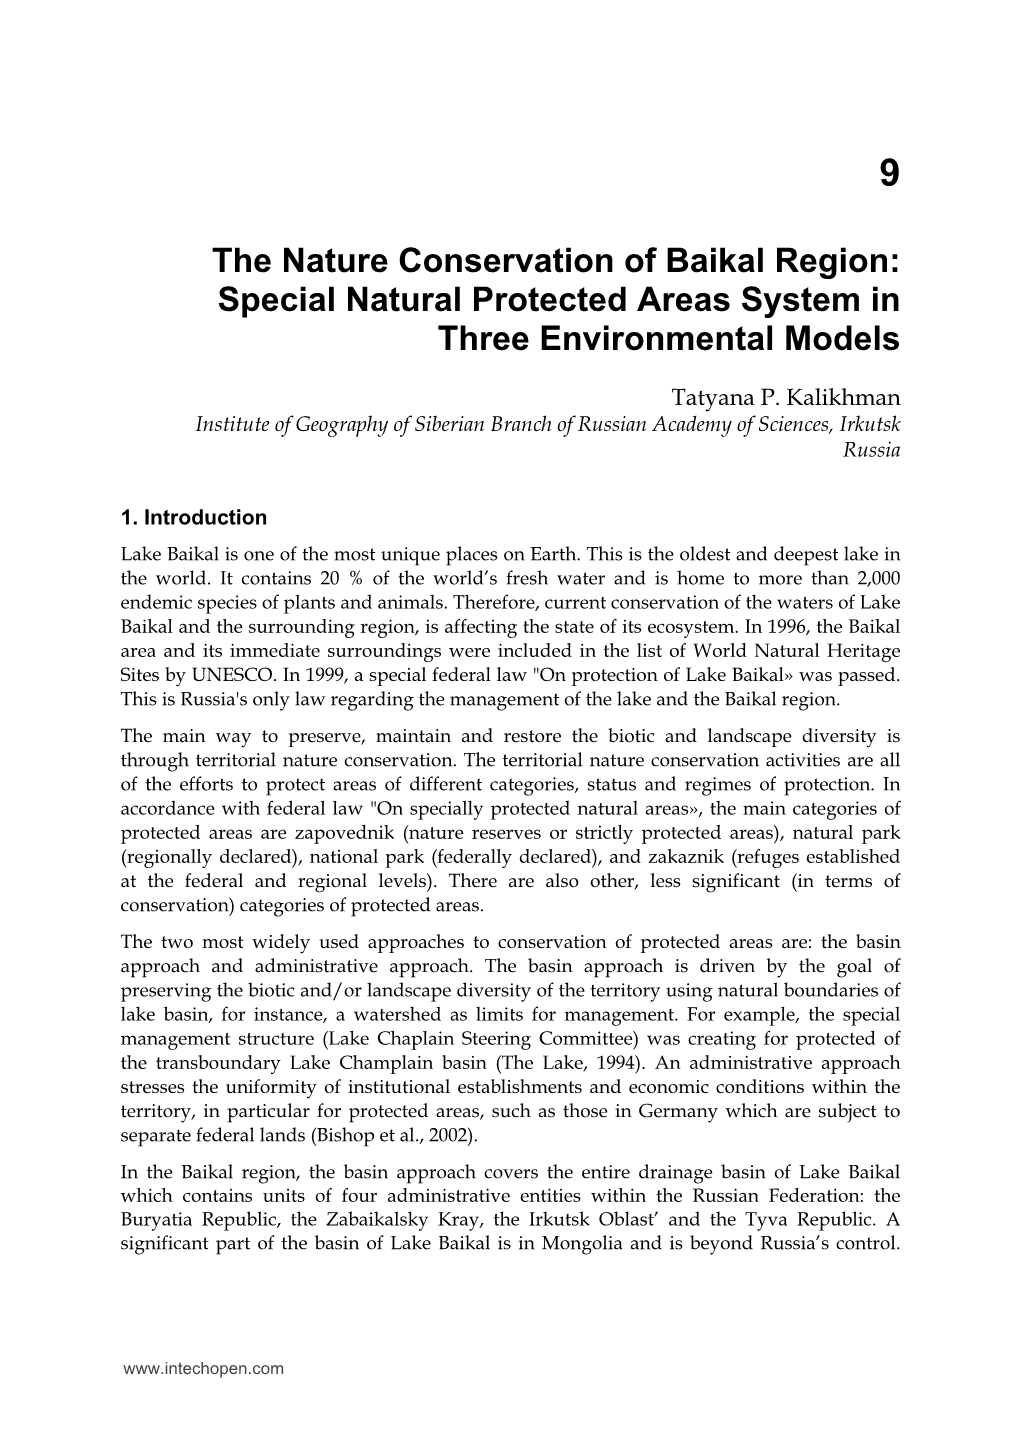 The Nature Conservation of Baikal Region: Special Natural Protected Areas System in Three Environmental Models